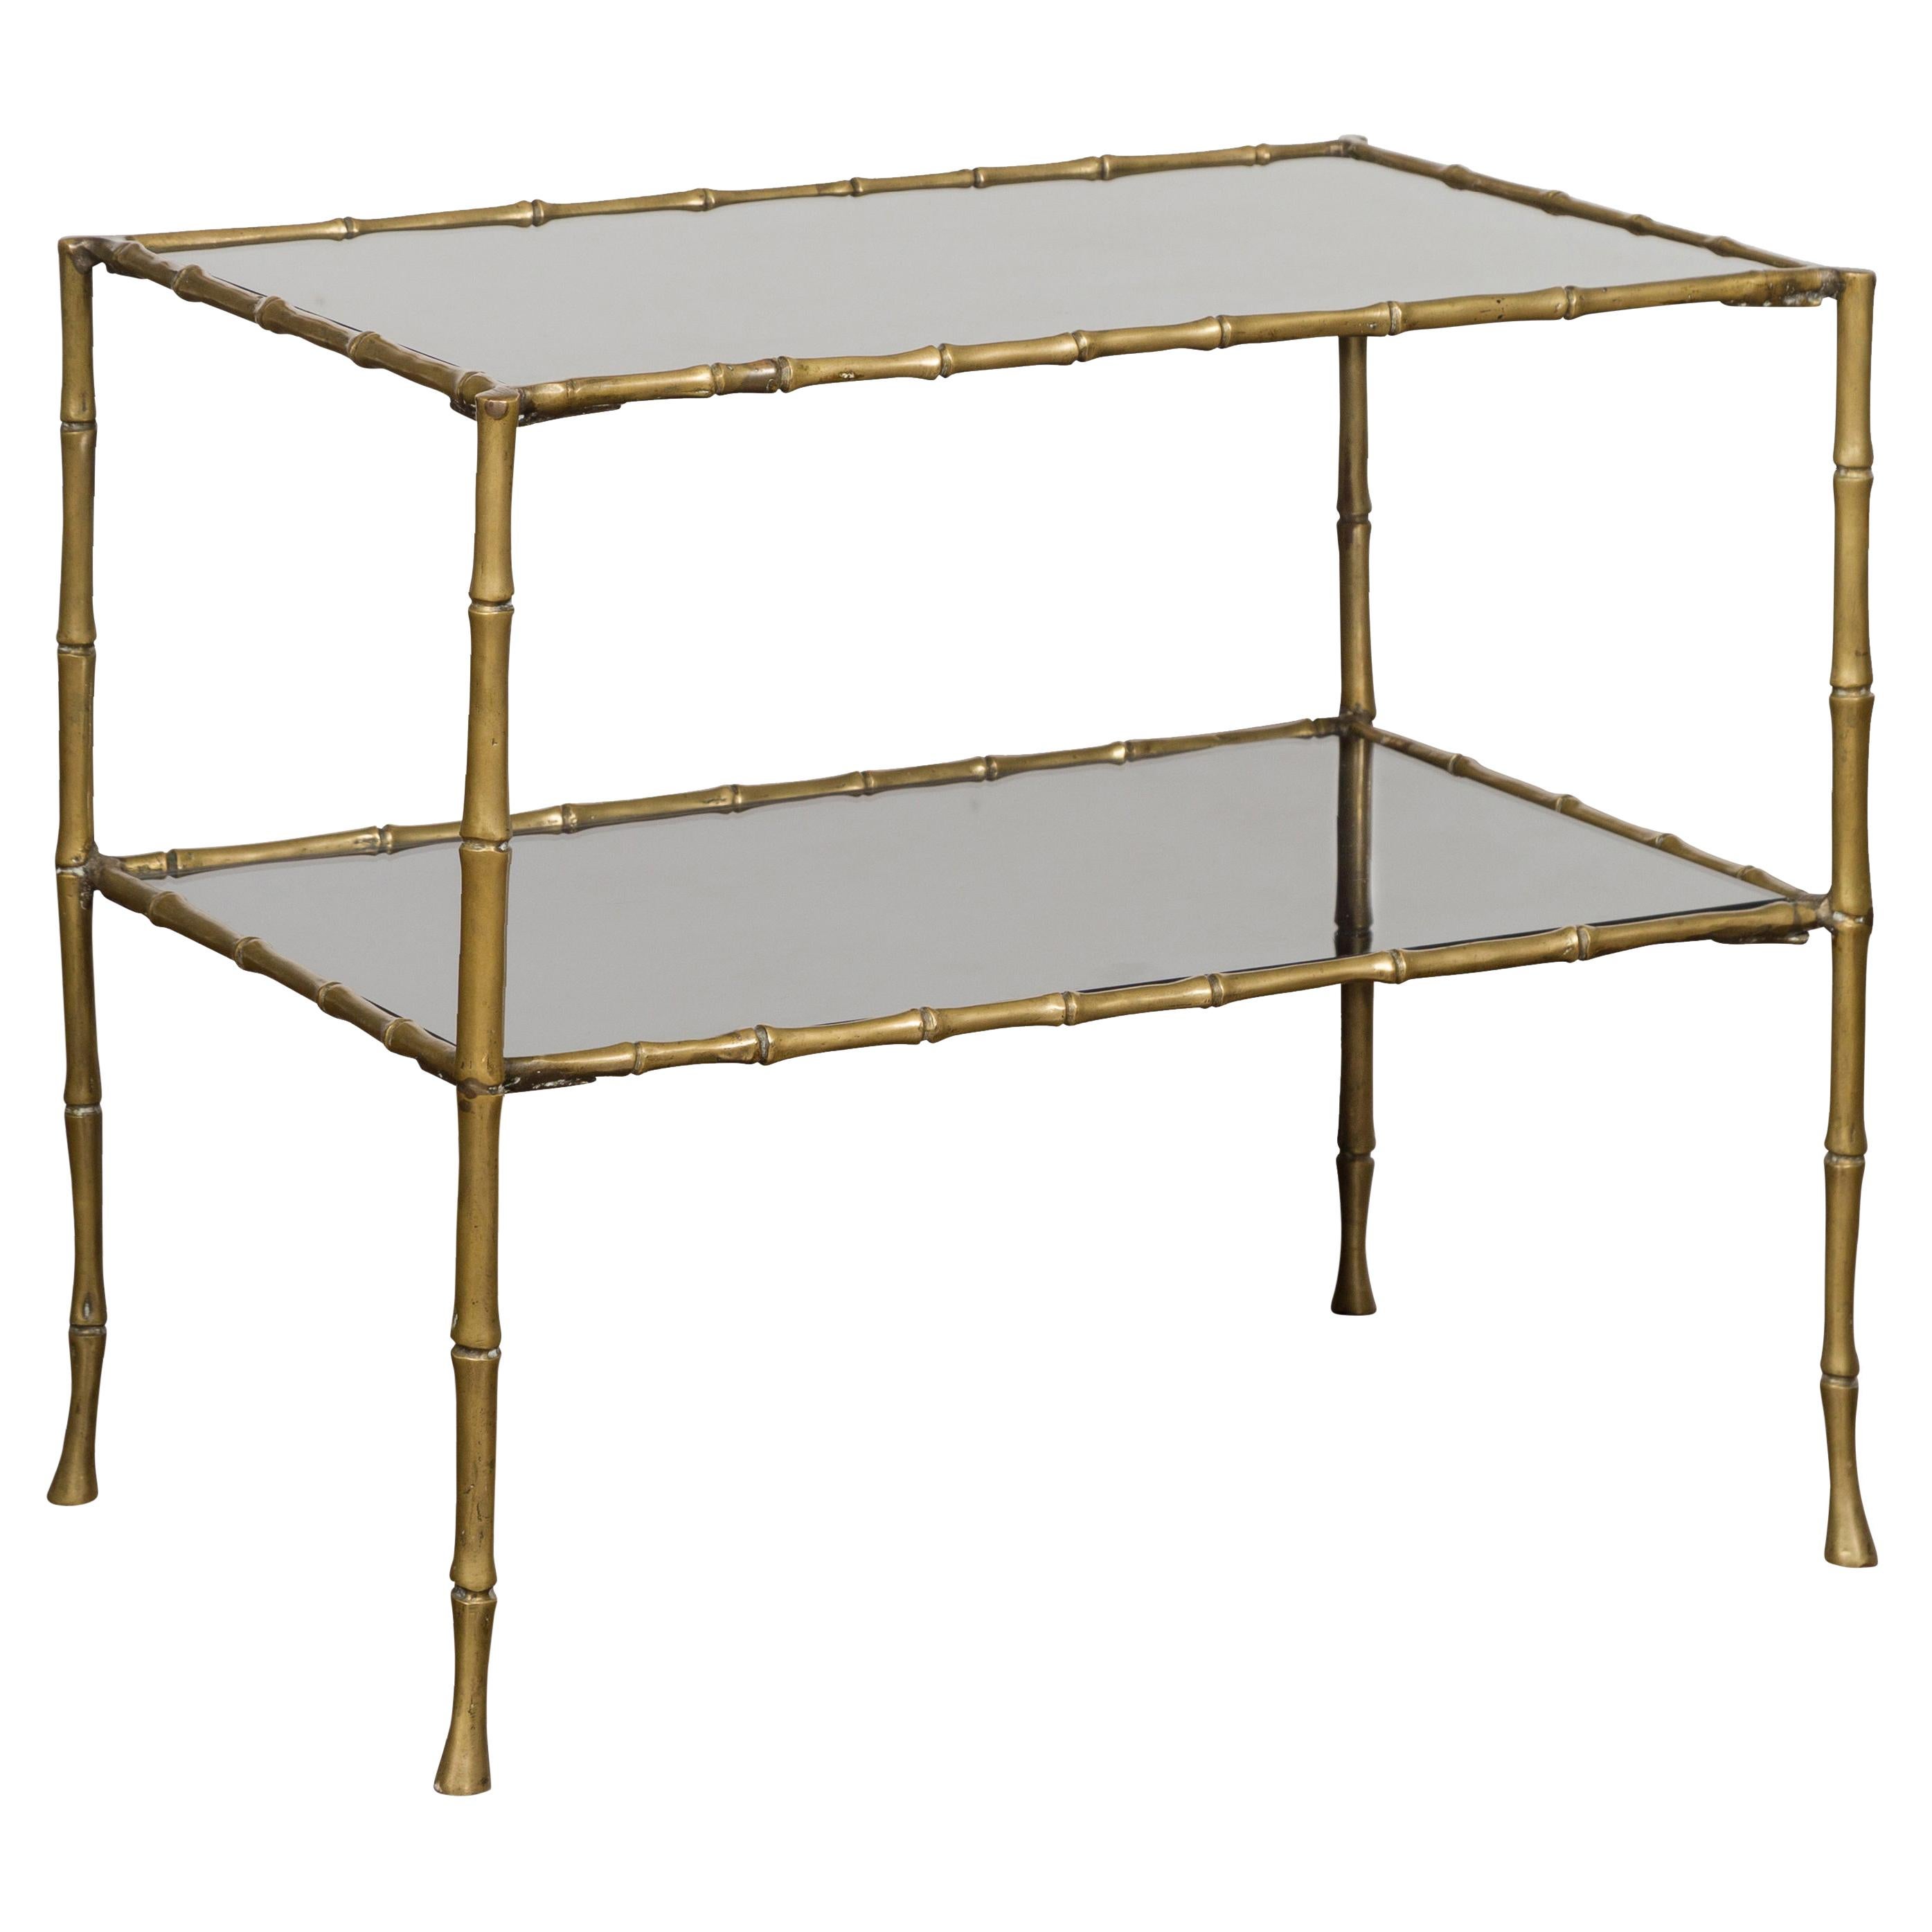 Midcentury Italian Brass Faux Bamboo Drinks Table with Mirrored Top and Shelf